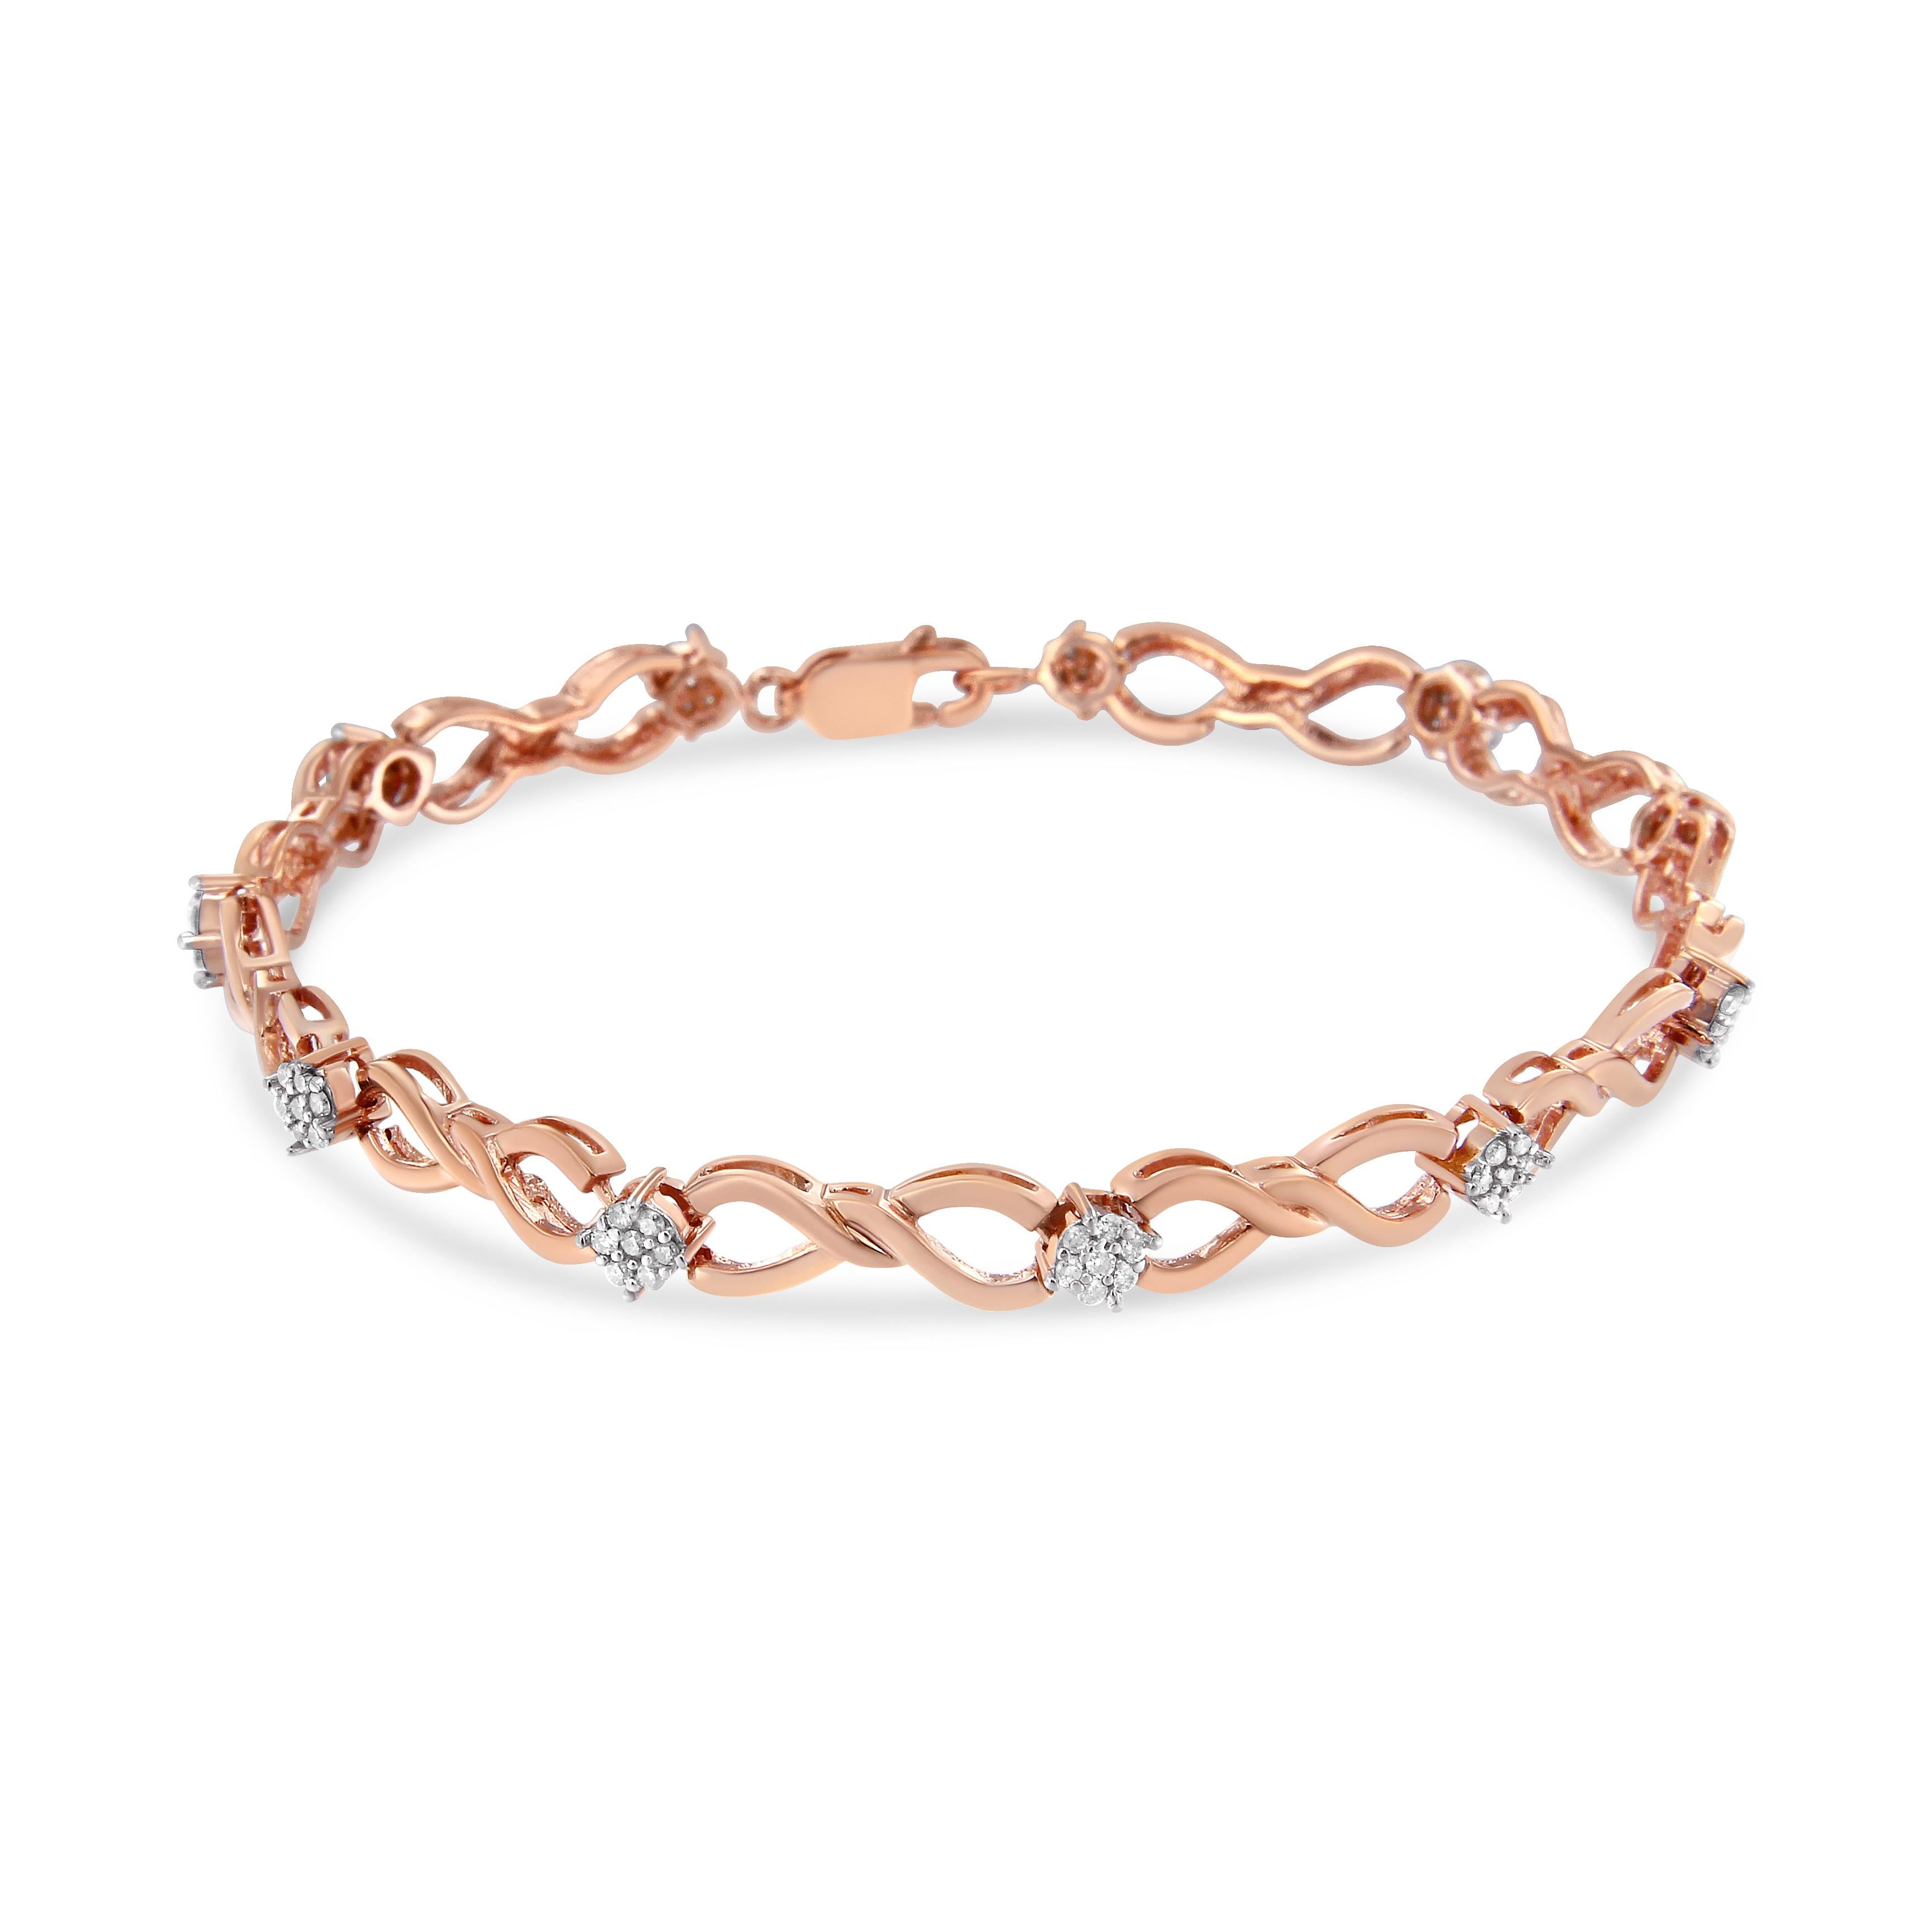 Elegant and timeless, this gorgeous two tone 10K yellow gold coated sterling silver link bracelet features 0.50 carat total weight of round, brilliant cut diamonds. The tennis bracelet features infinity links with a twist at the center, with a